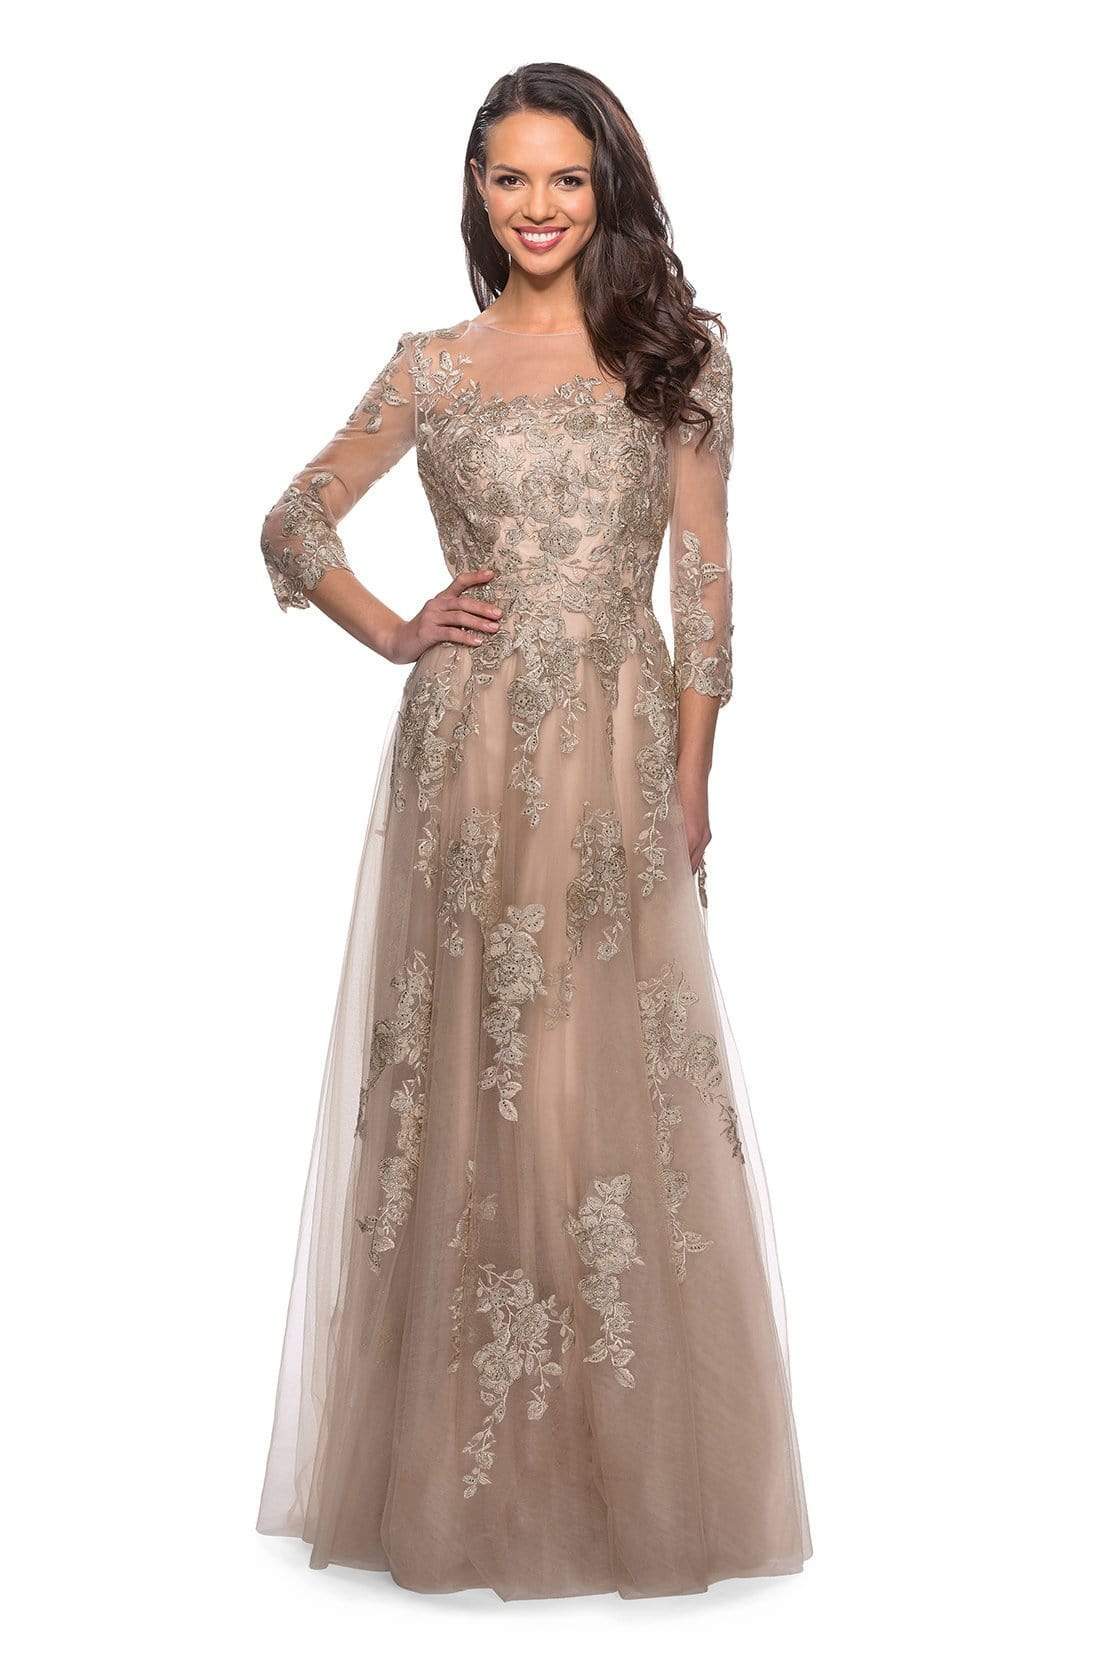 Image of La Femme - 27733 Quarter Sleeve Floral Embroidered Lace A-Line Gown